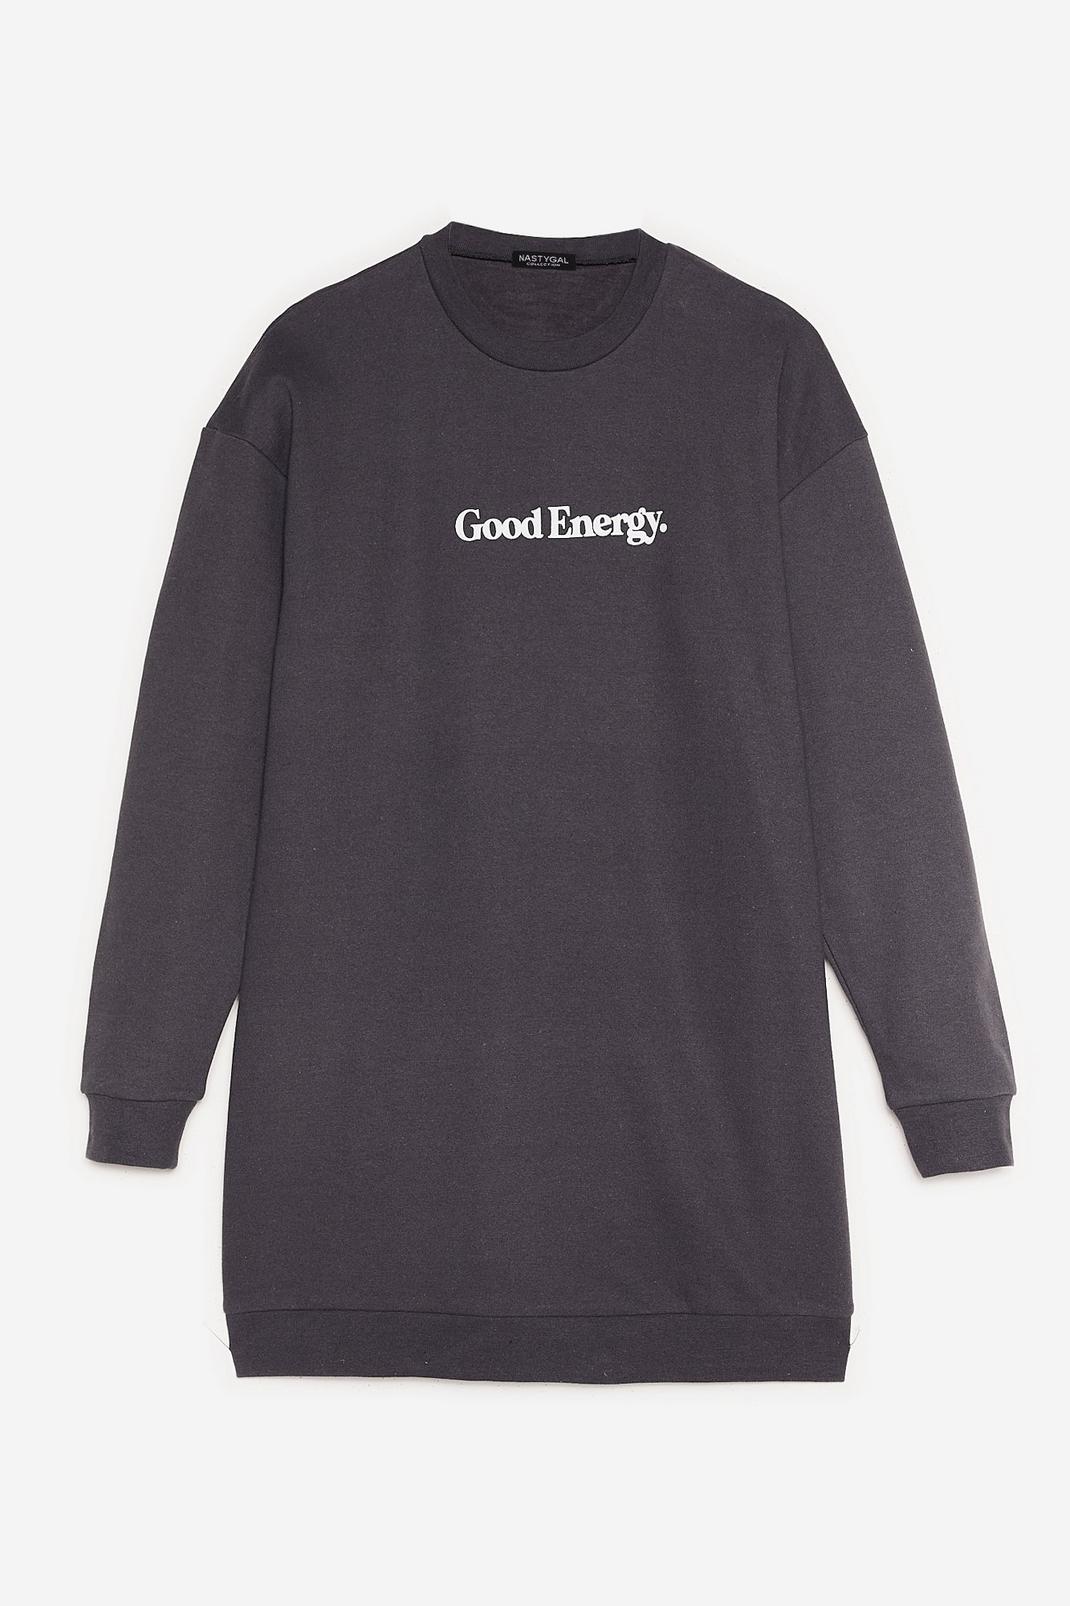 Petite - Robe sweat oversize à impression Good Energy, Charcoal image number 1